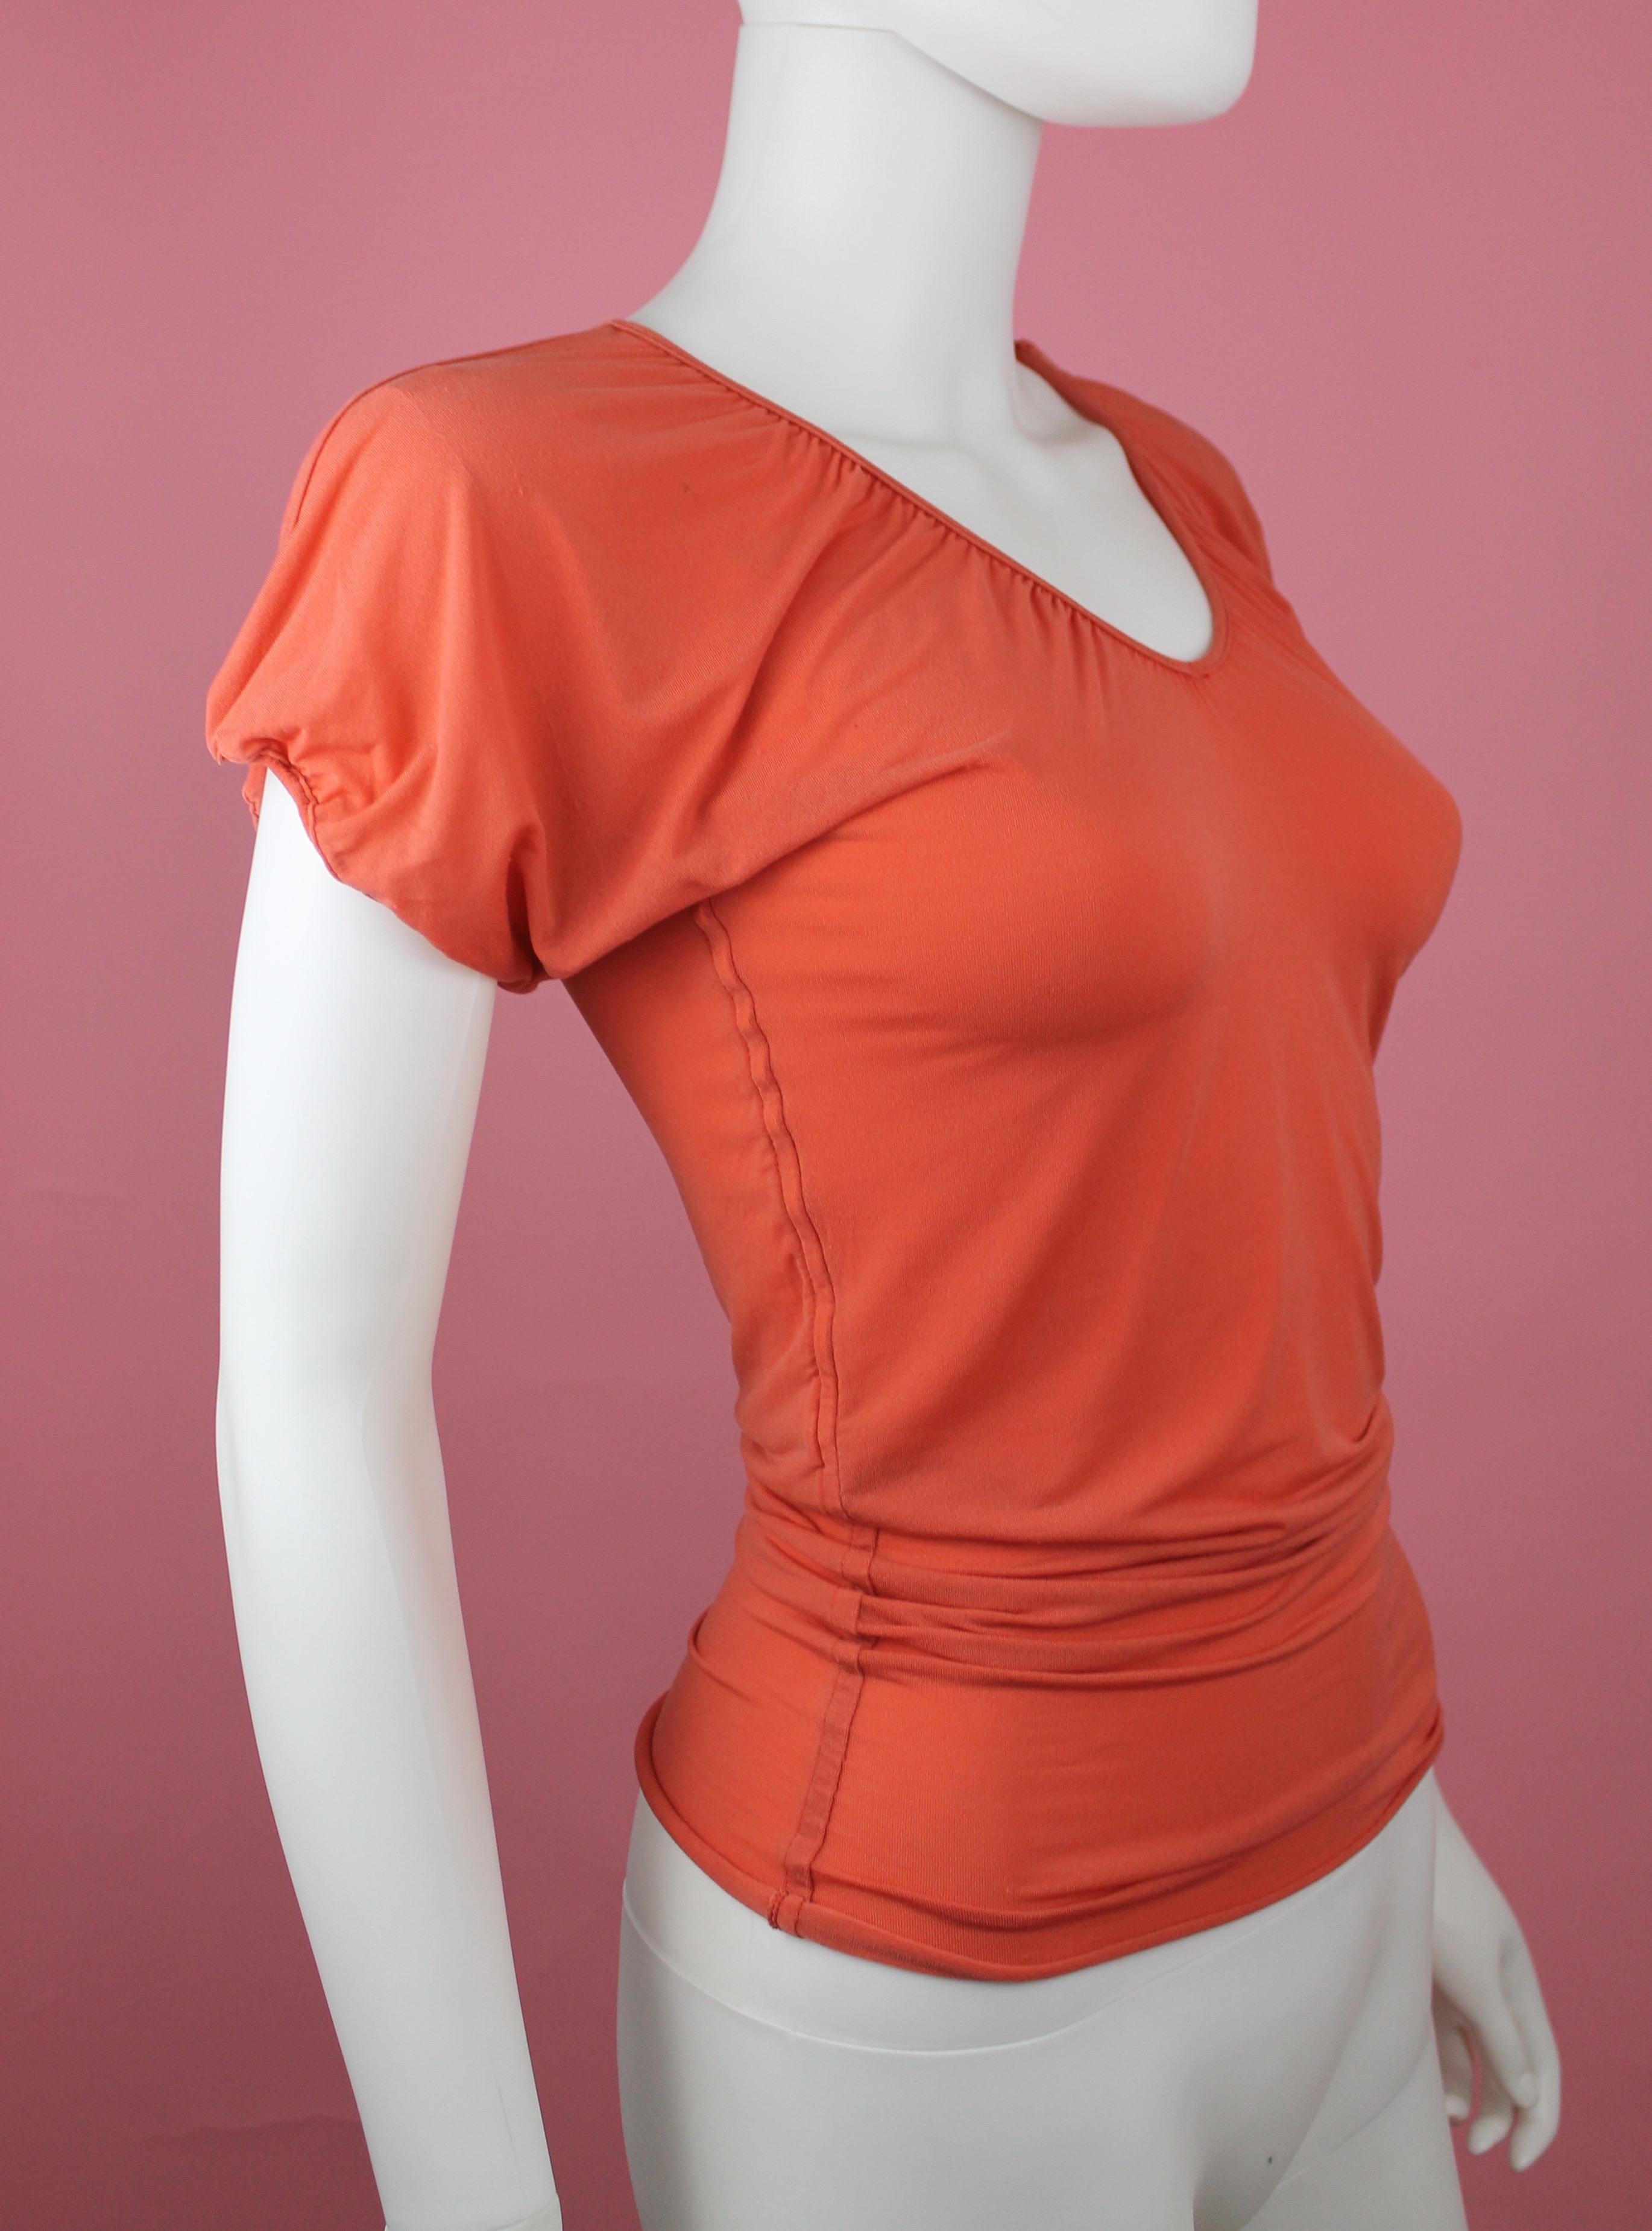 Jean Paul Gaultier Femme Ruched Sleeve Orange Top, Size 4 In Good Condition For Sale In Los Angeles, CA